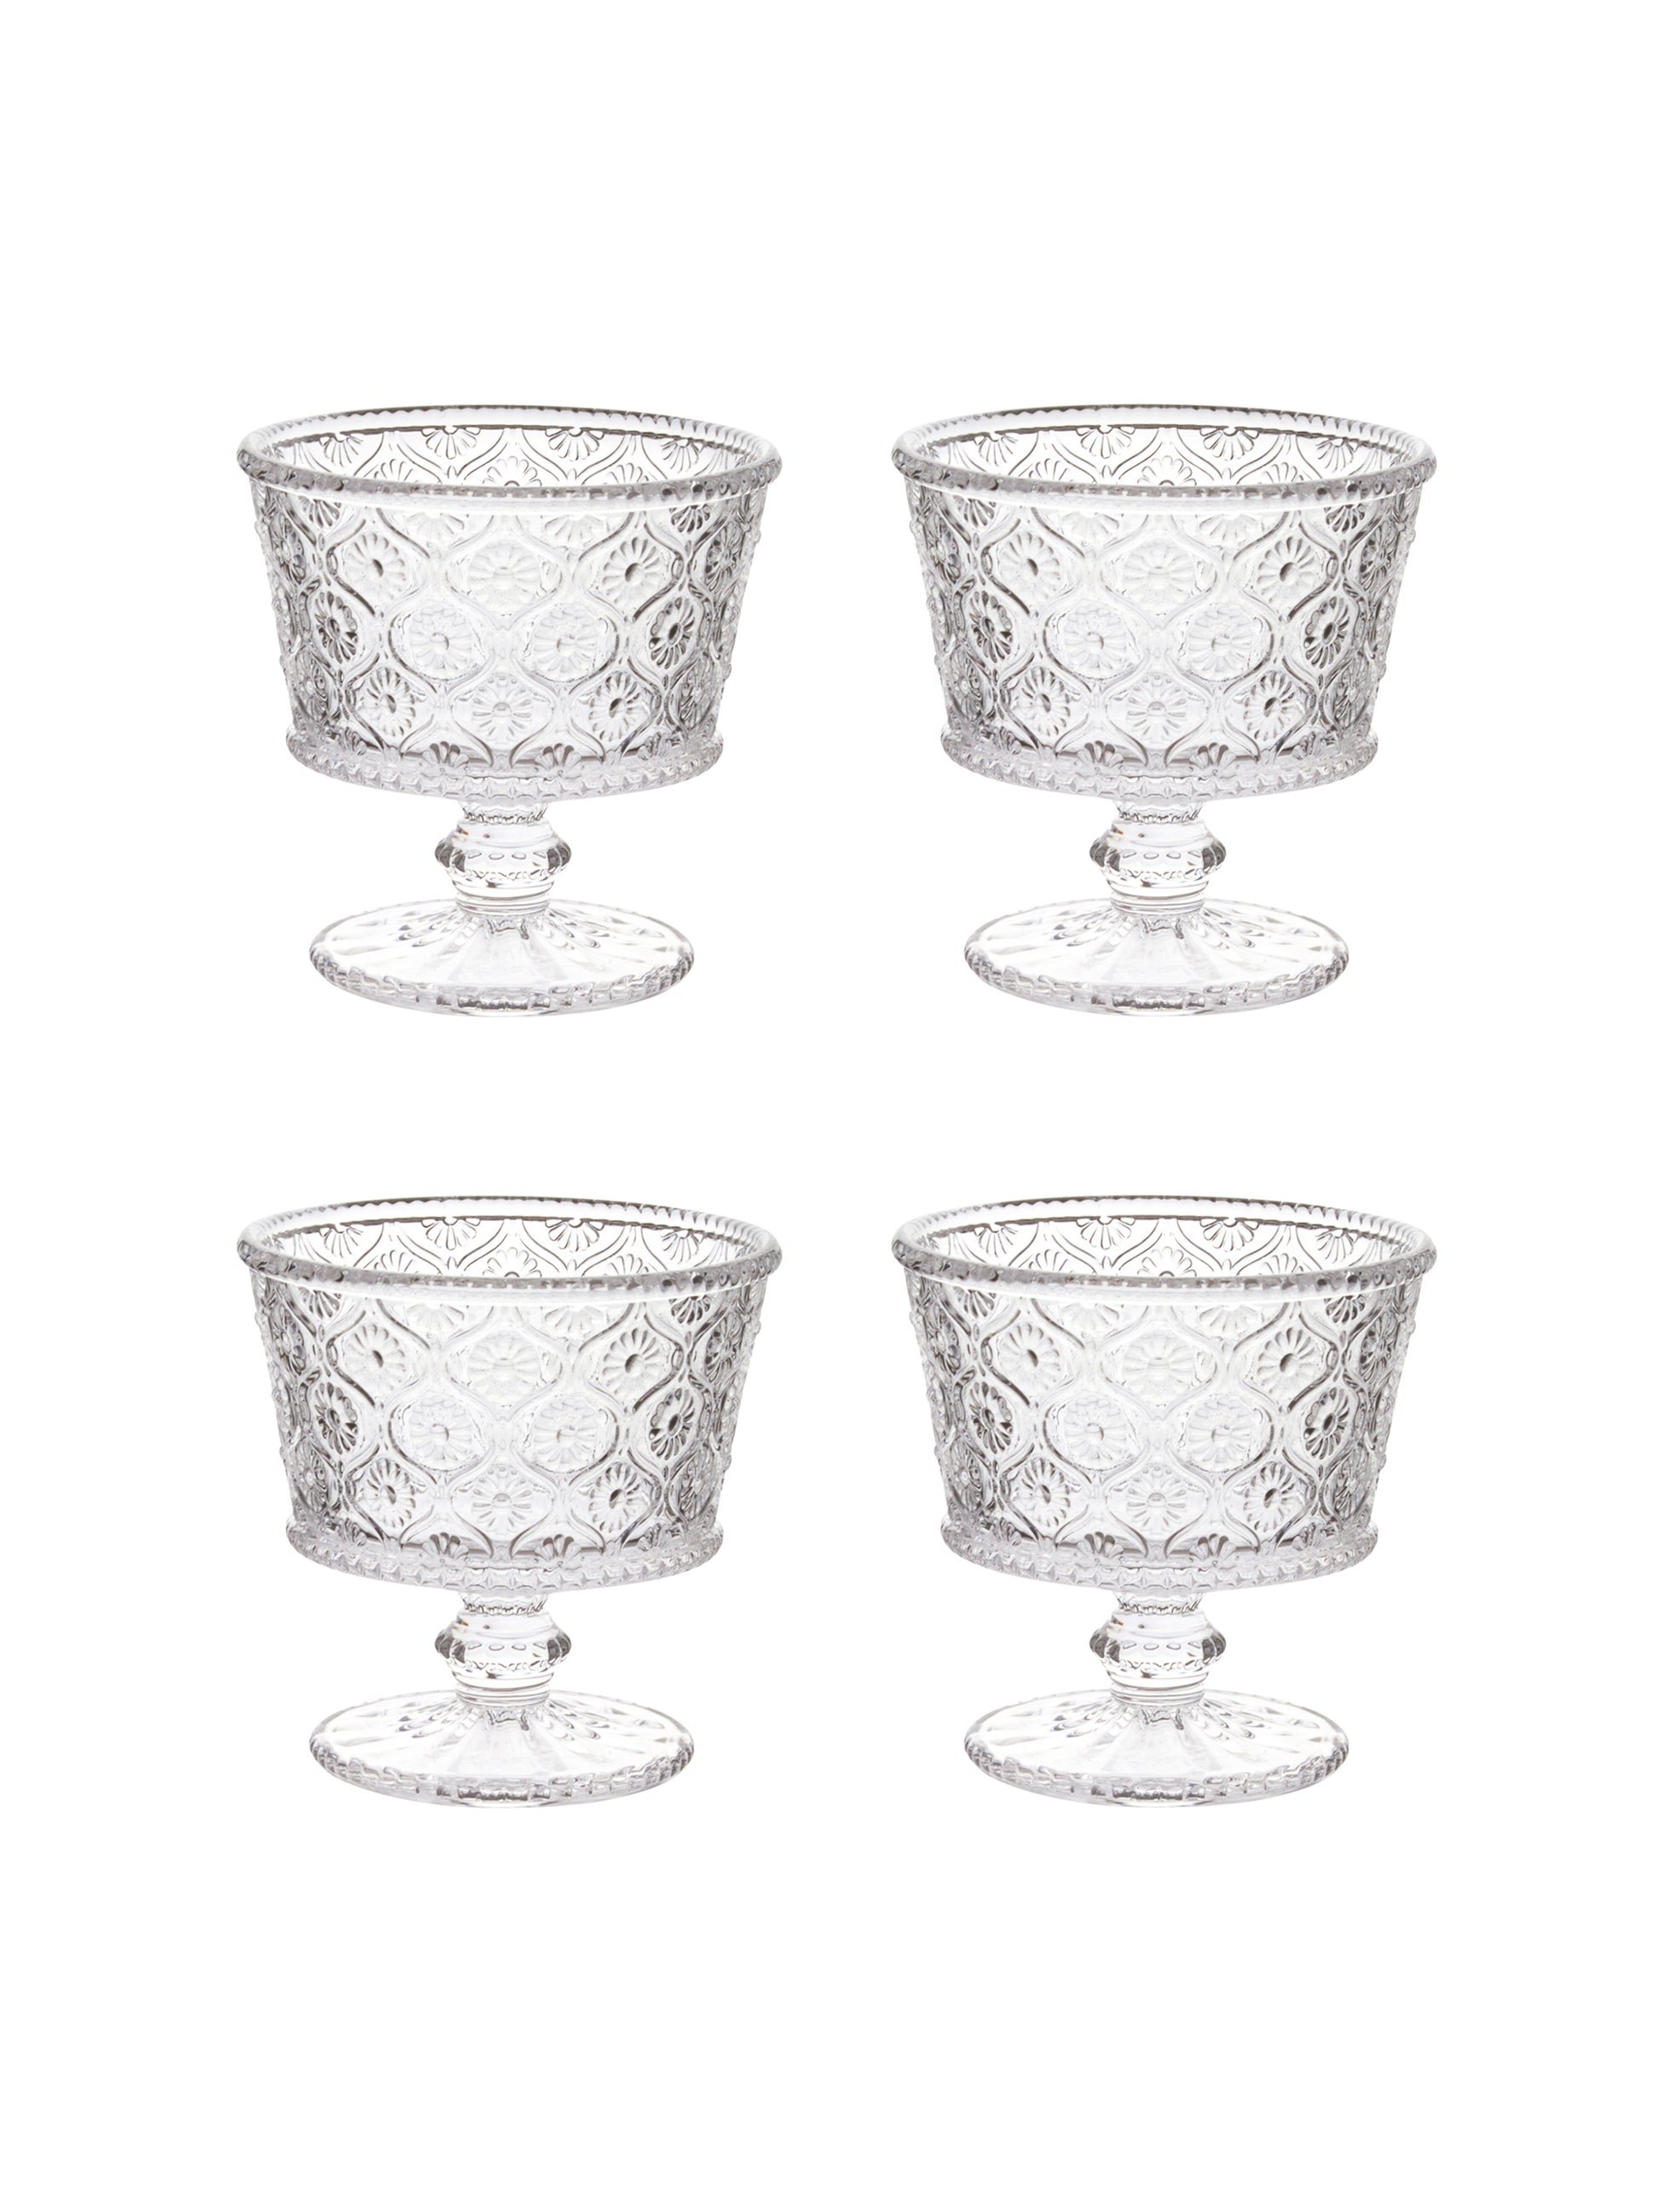 Cameo Dessert Dishes Set of Four Weston Table